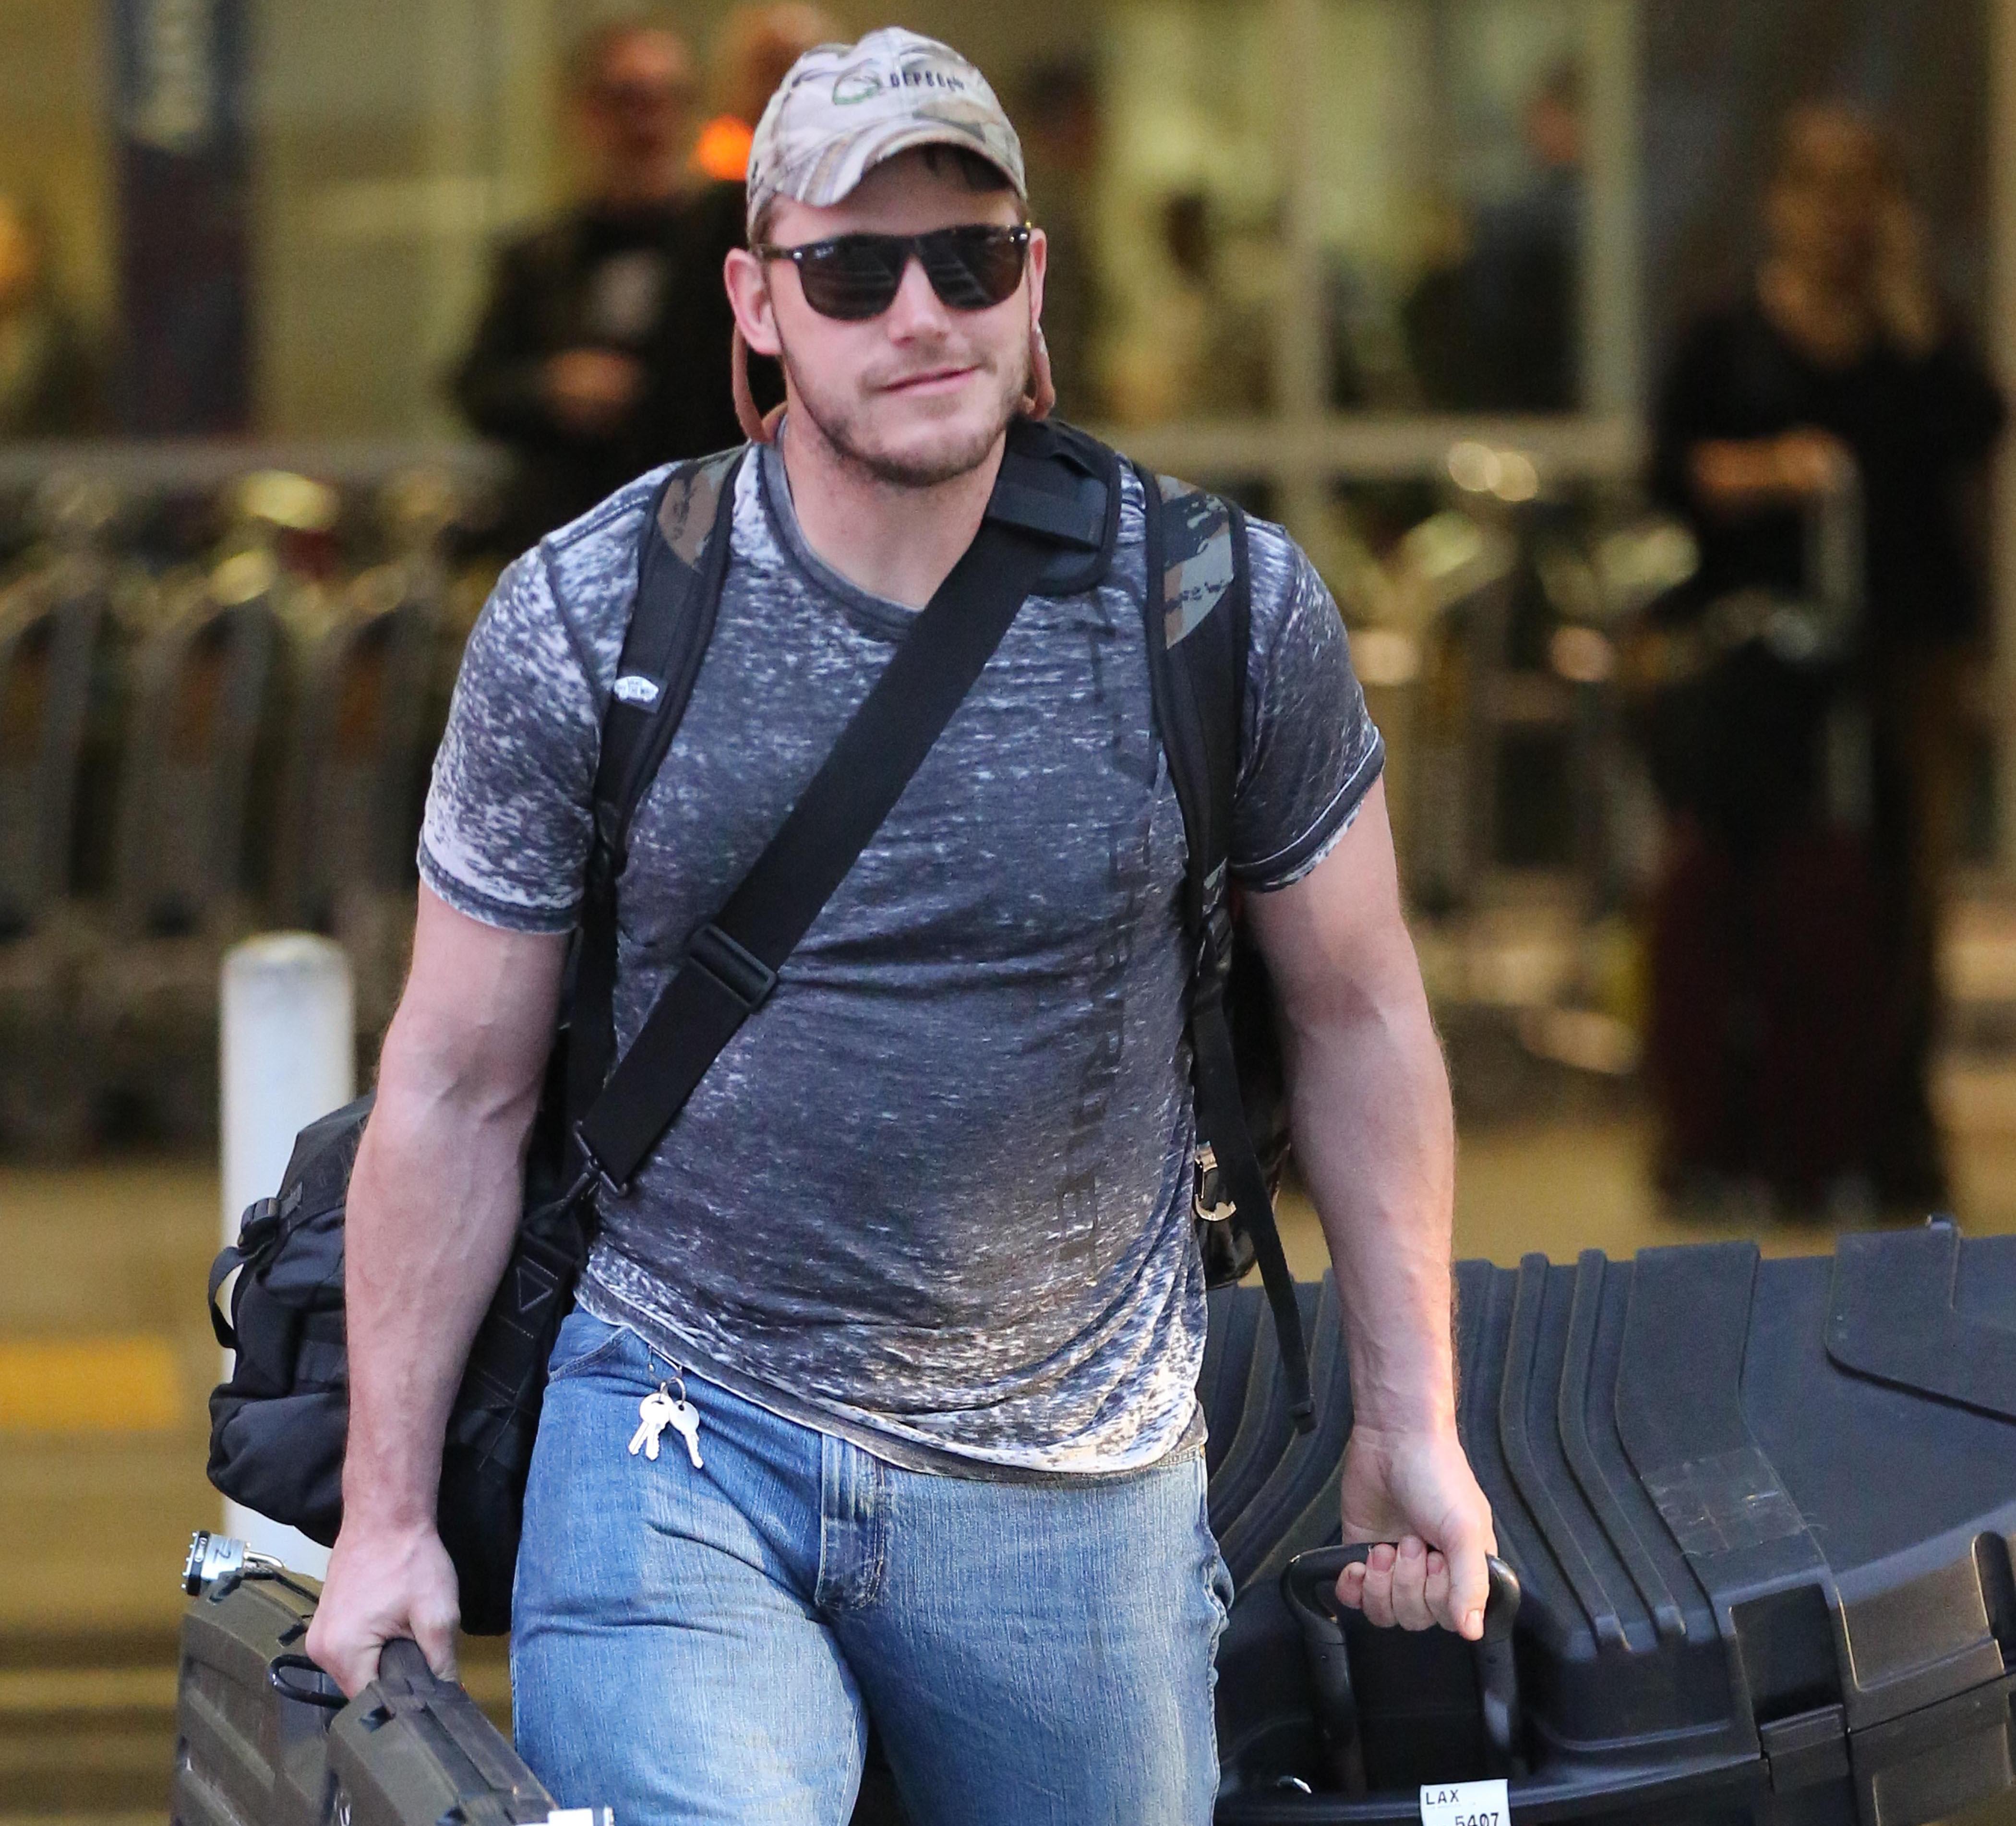 Chris Pratt shows his rugged side wearing camouflage, blue jeans and a camouflage hat as he arrives in Los Angeles